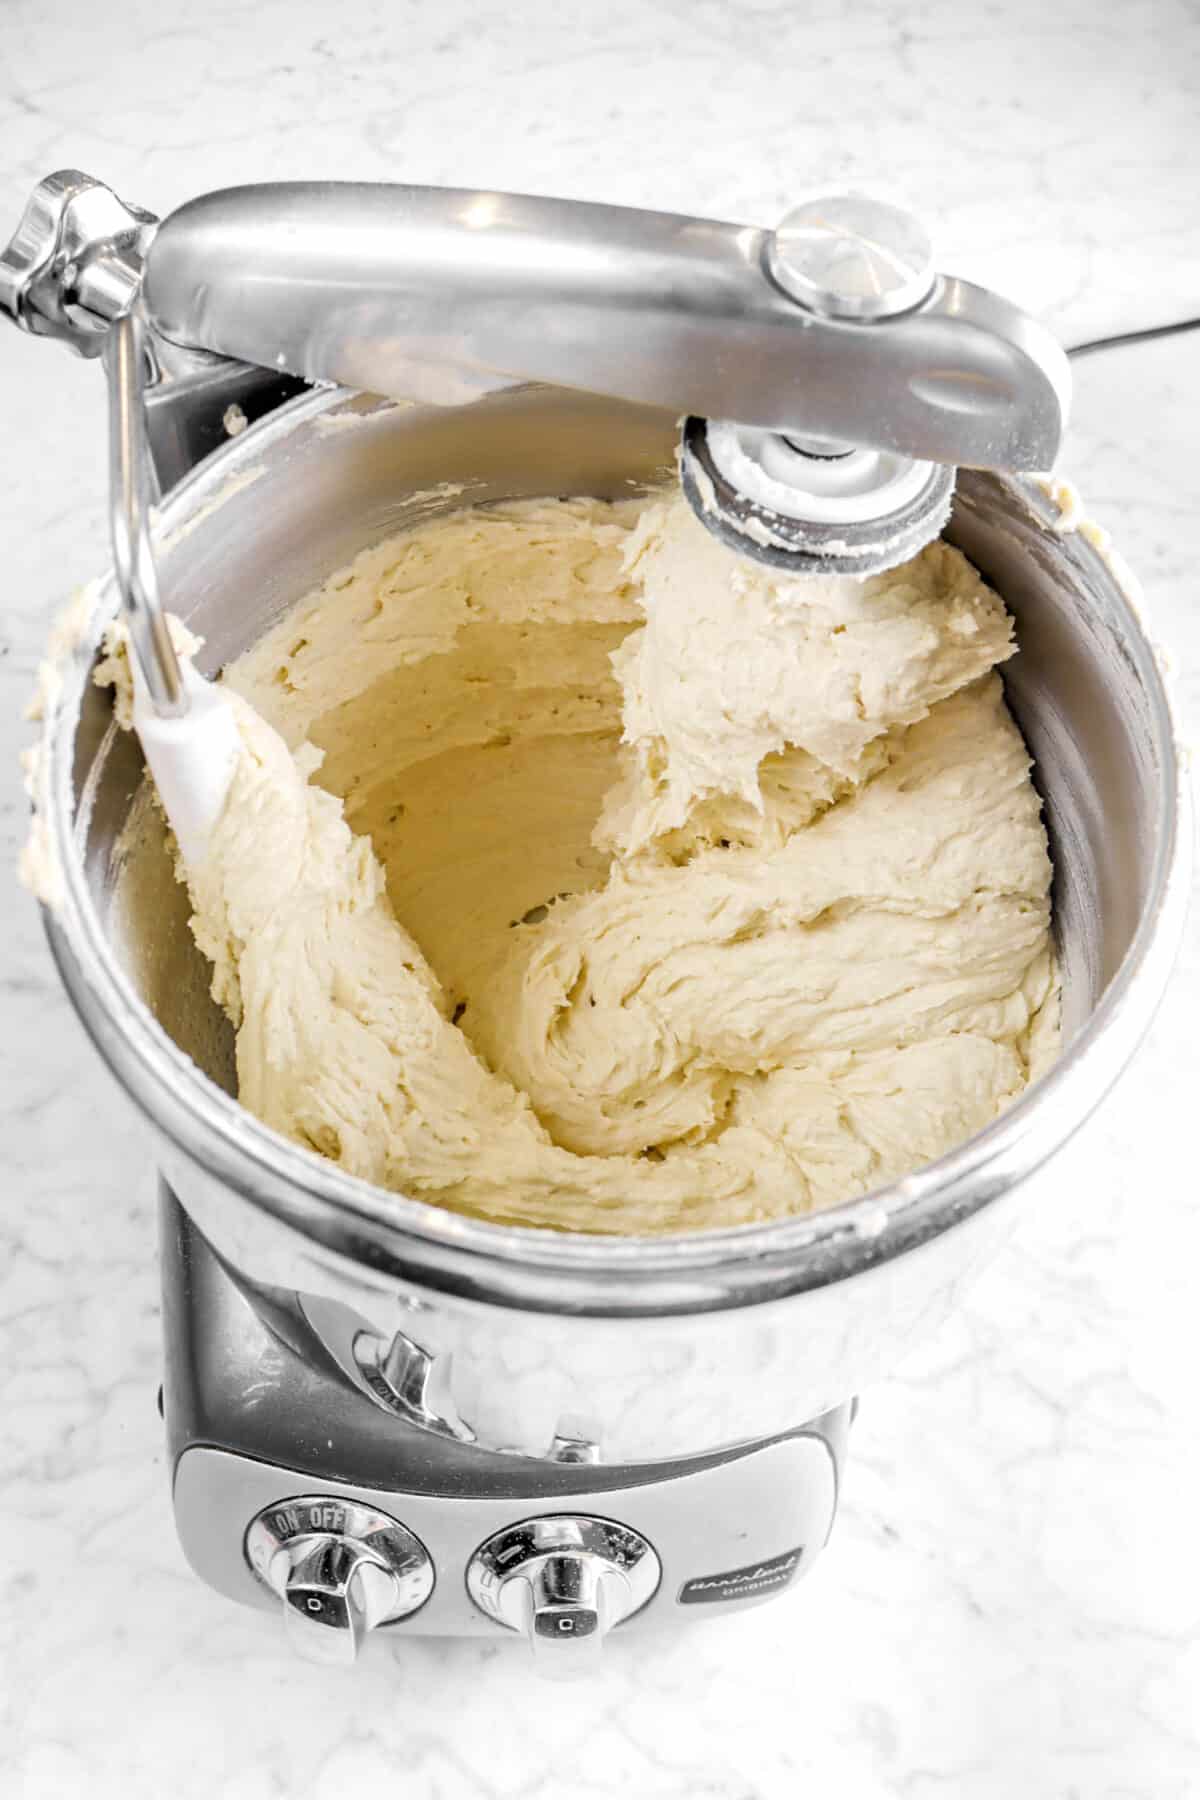 dry ingredients stirred into coffee cake batter